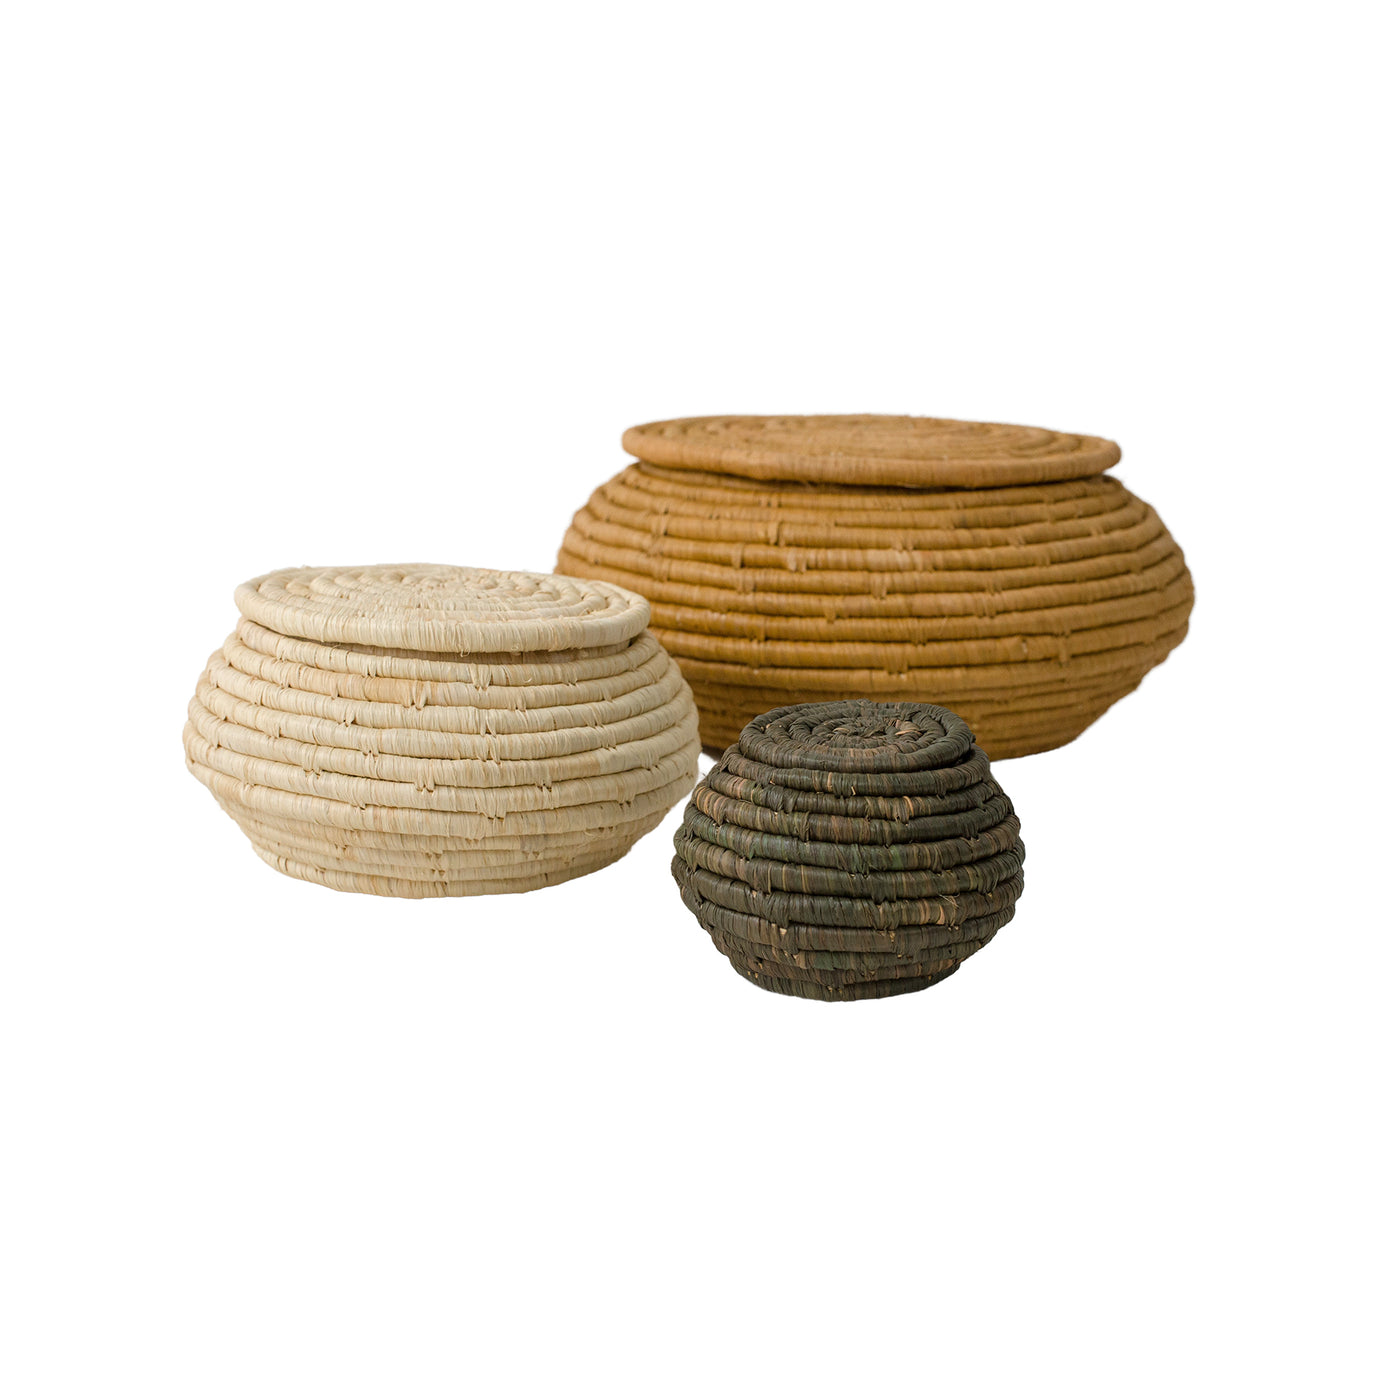 Town Square Lidded Boxes - Tan, Set of 3